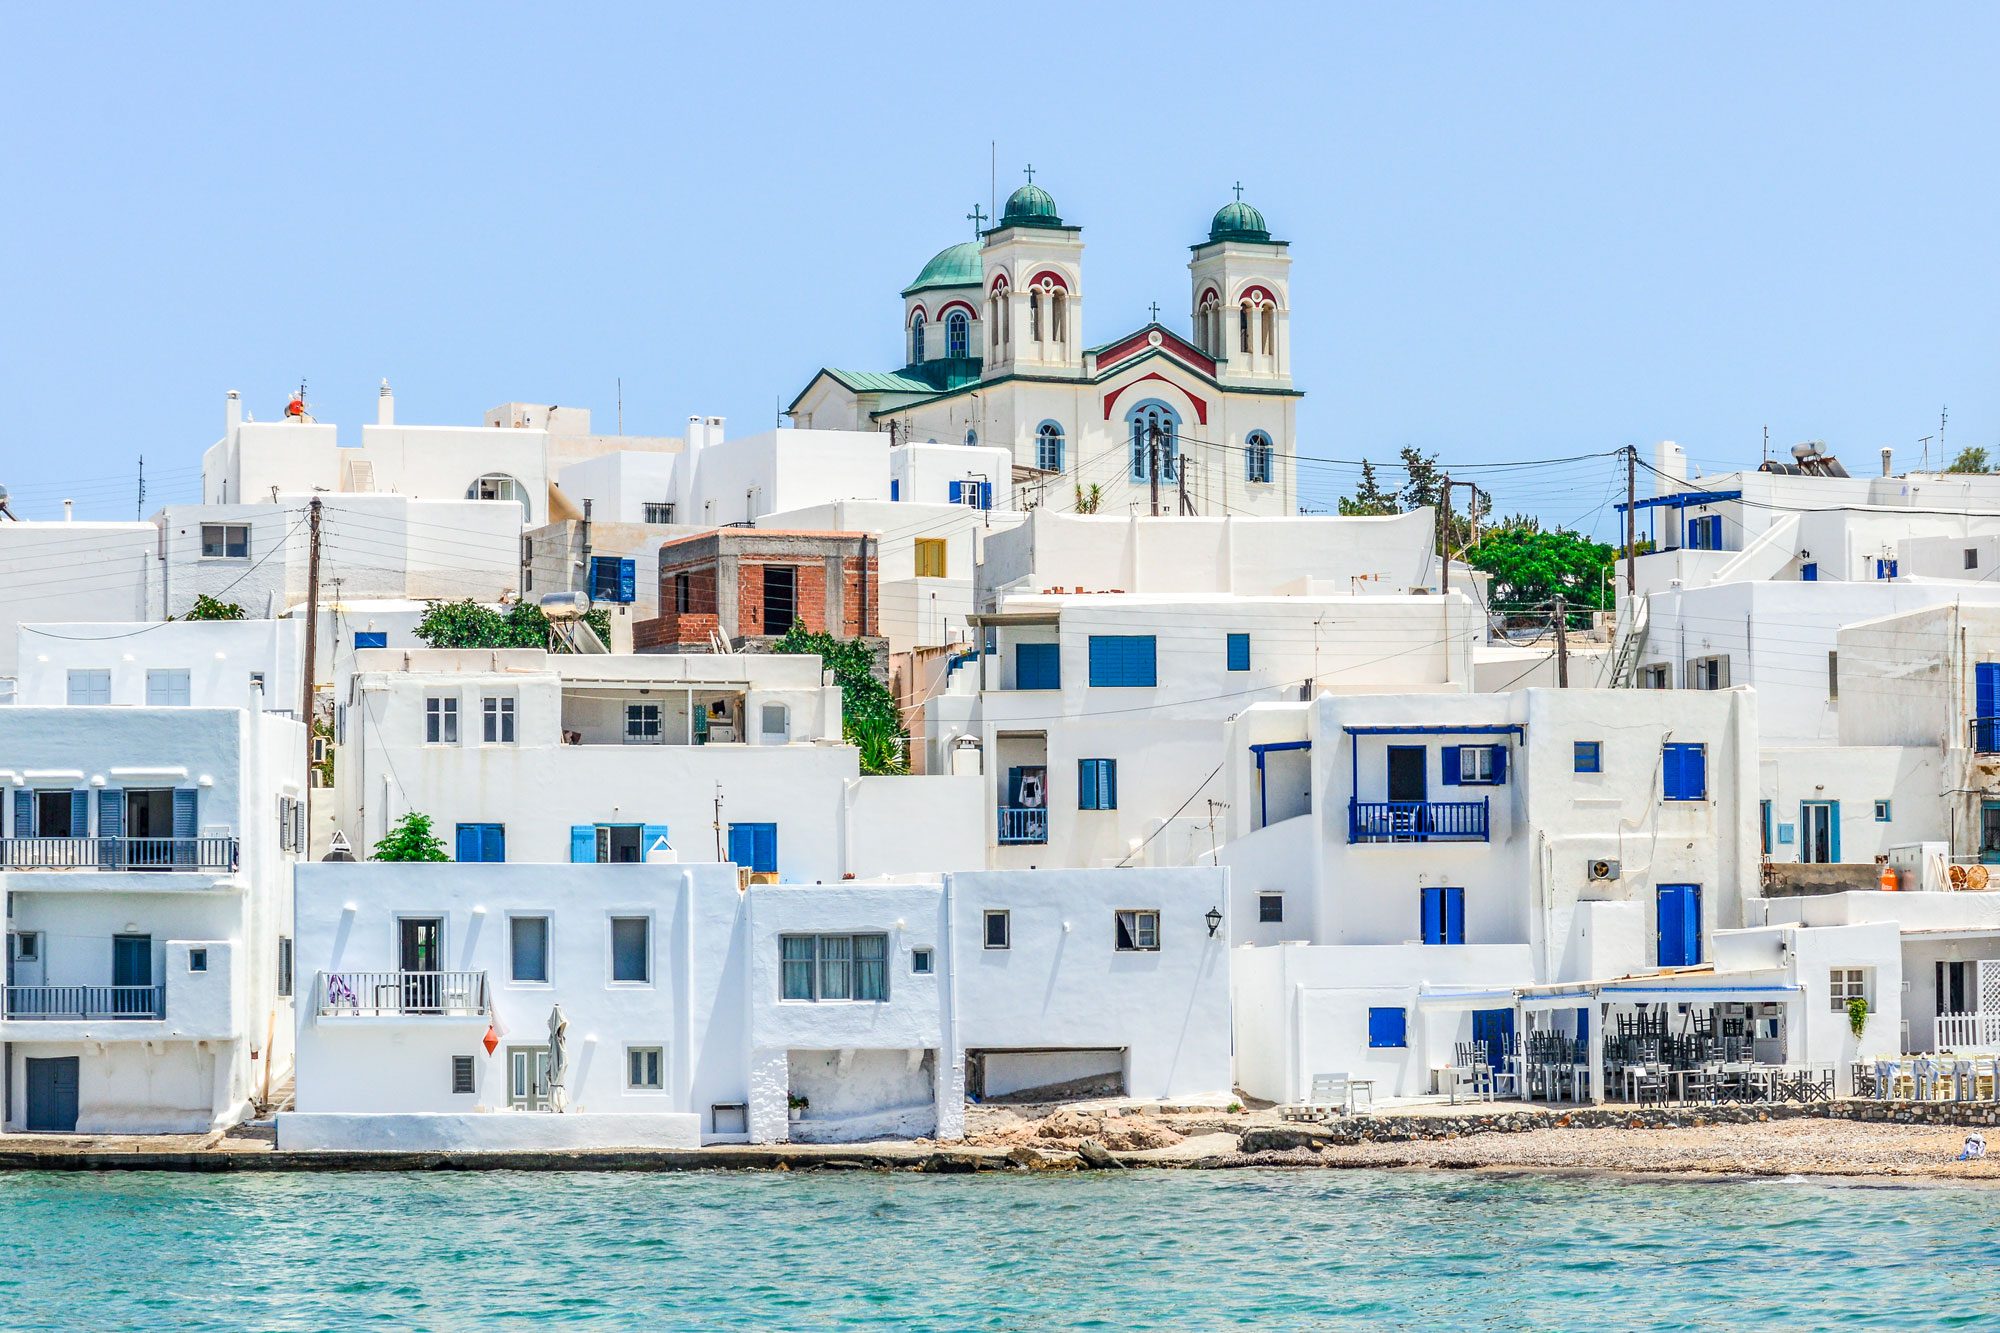 <p class=""><strong>Why you should go: </strong>The perfect Greek island vacation—without the crowds</p> <p>Have you heard of destination dupes? According to Expedia, these are "places that are a little unexpected, sometimes more affordable and every bit as delightful as the tried-and-true destinations travelers love." One of our favorites on Expedia's list is this stunning Greek island that usually sails under the most travelers' Mediterranean radars in uncrowded bliss while the hordes of tourists head to Mykonos and Santorini.</p> <p>Visiting the island, which is about a two-hour ferry ride south of well-known party island Mykonos and right next to Naxos, is one of the best things to do in <a href="https://www.rd.com/article/best-time-to-visit-greece/">Greece</a>, since it means enjoying idyllic beaches framed by the azure waters of the Aegean Sea. While you're here, explore the winding streets and charming villages of Naoussa and Lefkes, and sip whipped coffee frappes or ouzo at the picturesque port of Parikia (the island's capital), home to whitewashed houses adorned with vibrant bougainvillea.</p> <p><strong>Where to stay:</strong> You can't go wrong at the newly opened <a href="https://www.tripadvisor.com/Hotel_Review-g1190432-d625483-Reviews-Minois_Small_Luxury_Hotels_Of_The_World-Parasporos_Paros_Cyclades_South_Aegean.html" rel="noopener noreferrer">Minois hotel</a>, where the whitewashed walls hold luxurious touches, such as decadent dining at Olvo and pampering spa treatments. But the best part may be simply floating in the infinity pool with views of the sea spread out in front of you.</p> <p class="listicle-page__cta-button-shop"><a class="shop-btn" href="https://www.tripadvisor.com/Hotel_Review-g1190432-d625483-Reviews-Minois_Small_Luxury_Hotels_Of_The_World-Parasporos_Paros_Cyclades_South_Aegean.html">Book Now</a></p>